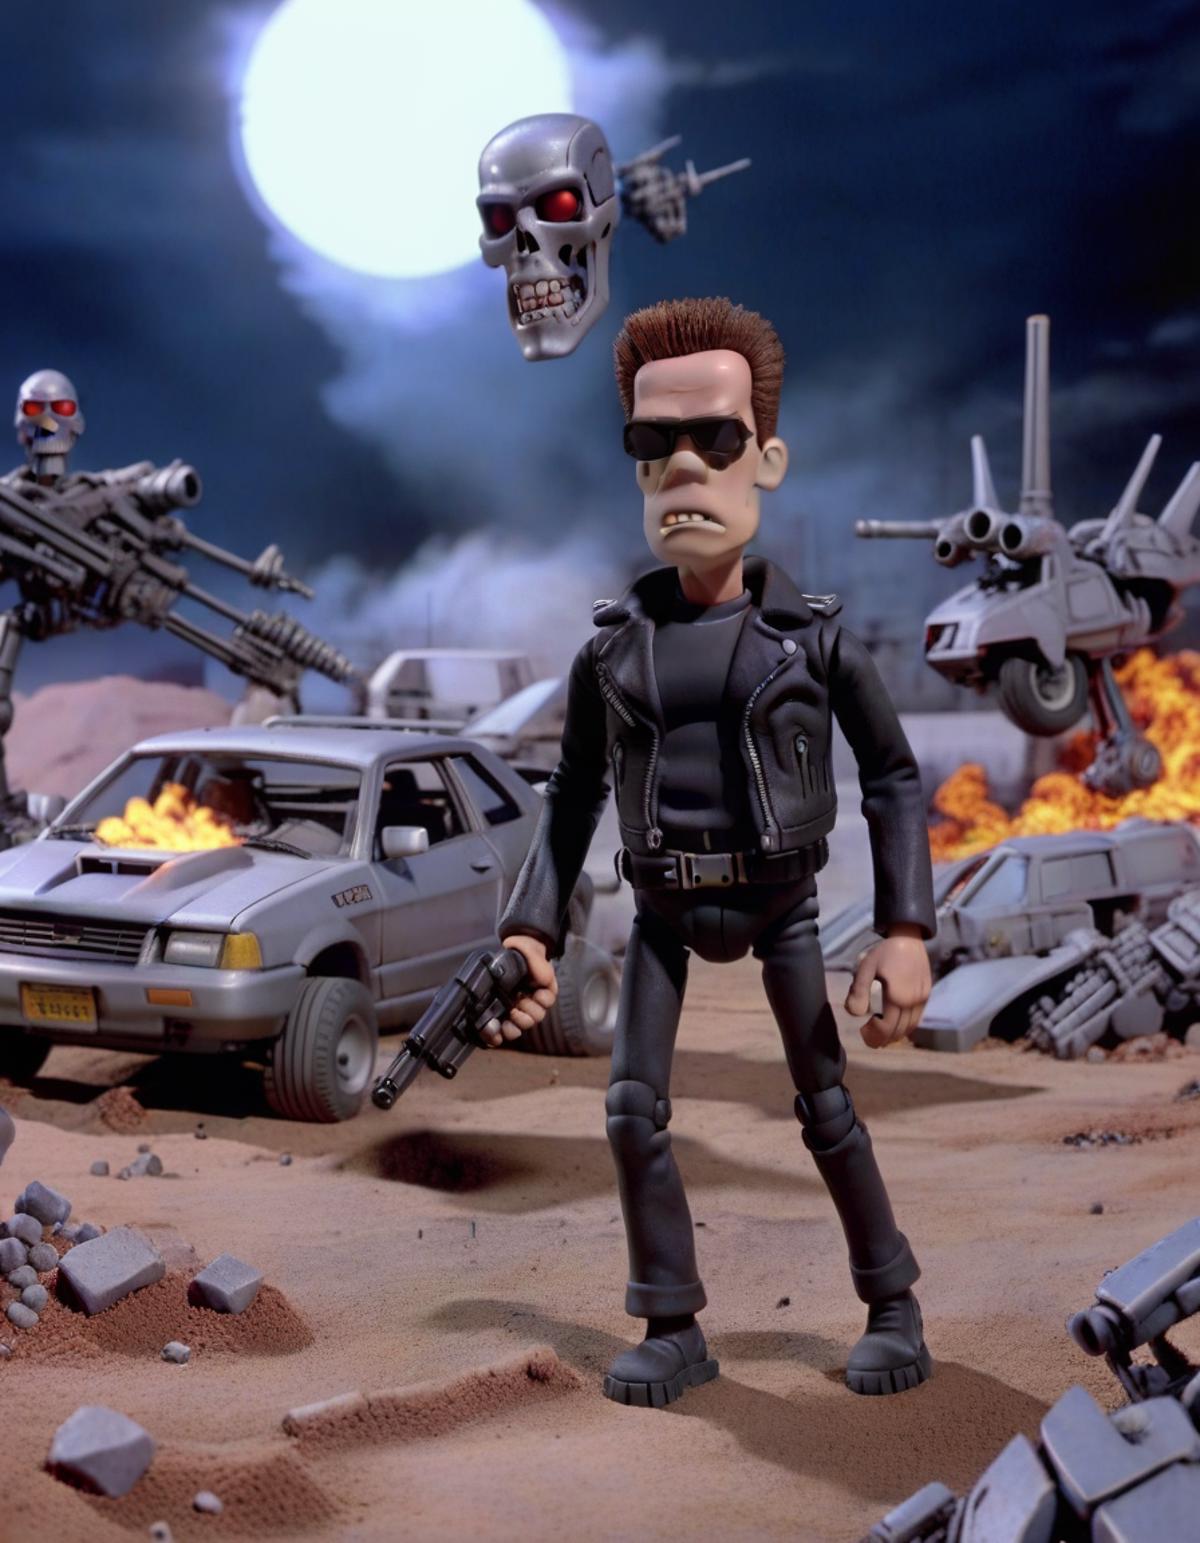 A stop-motion animation of a man in a leather jacket standing in front of a car and other vehicles.